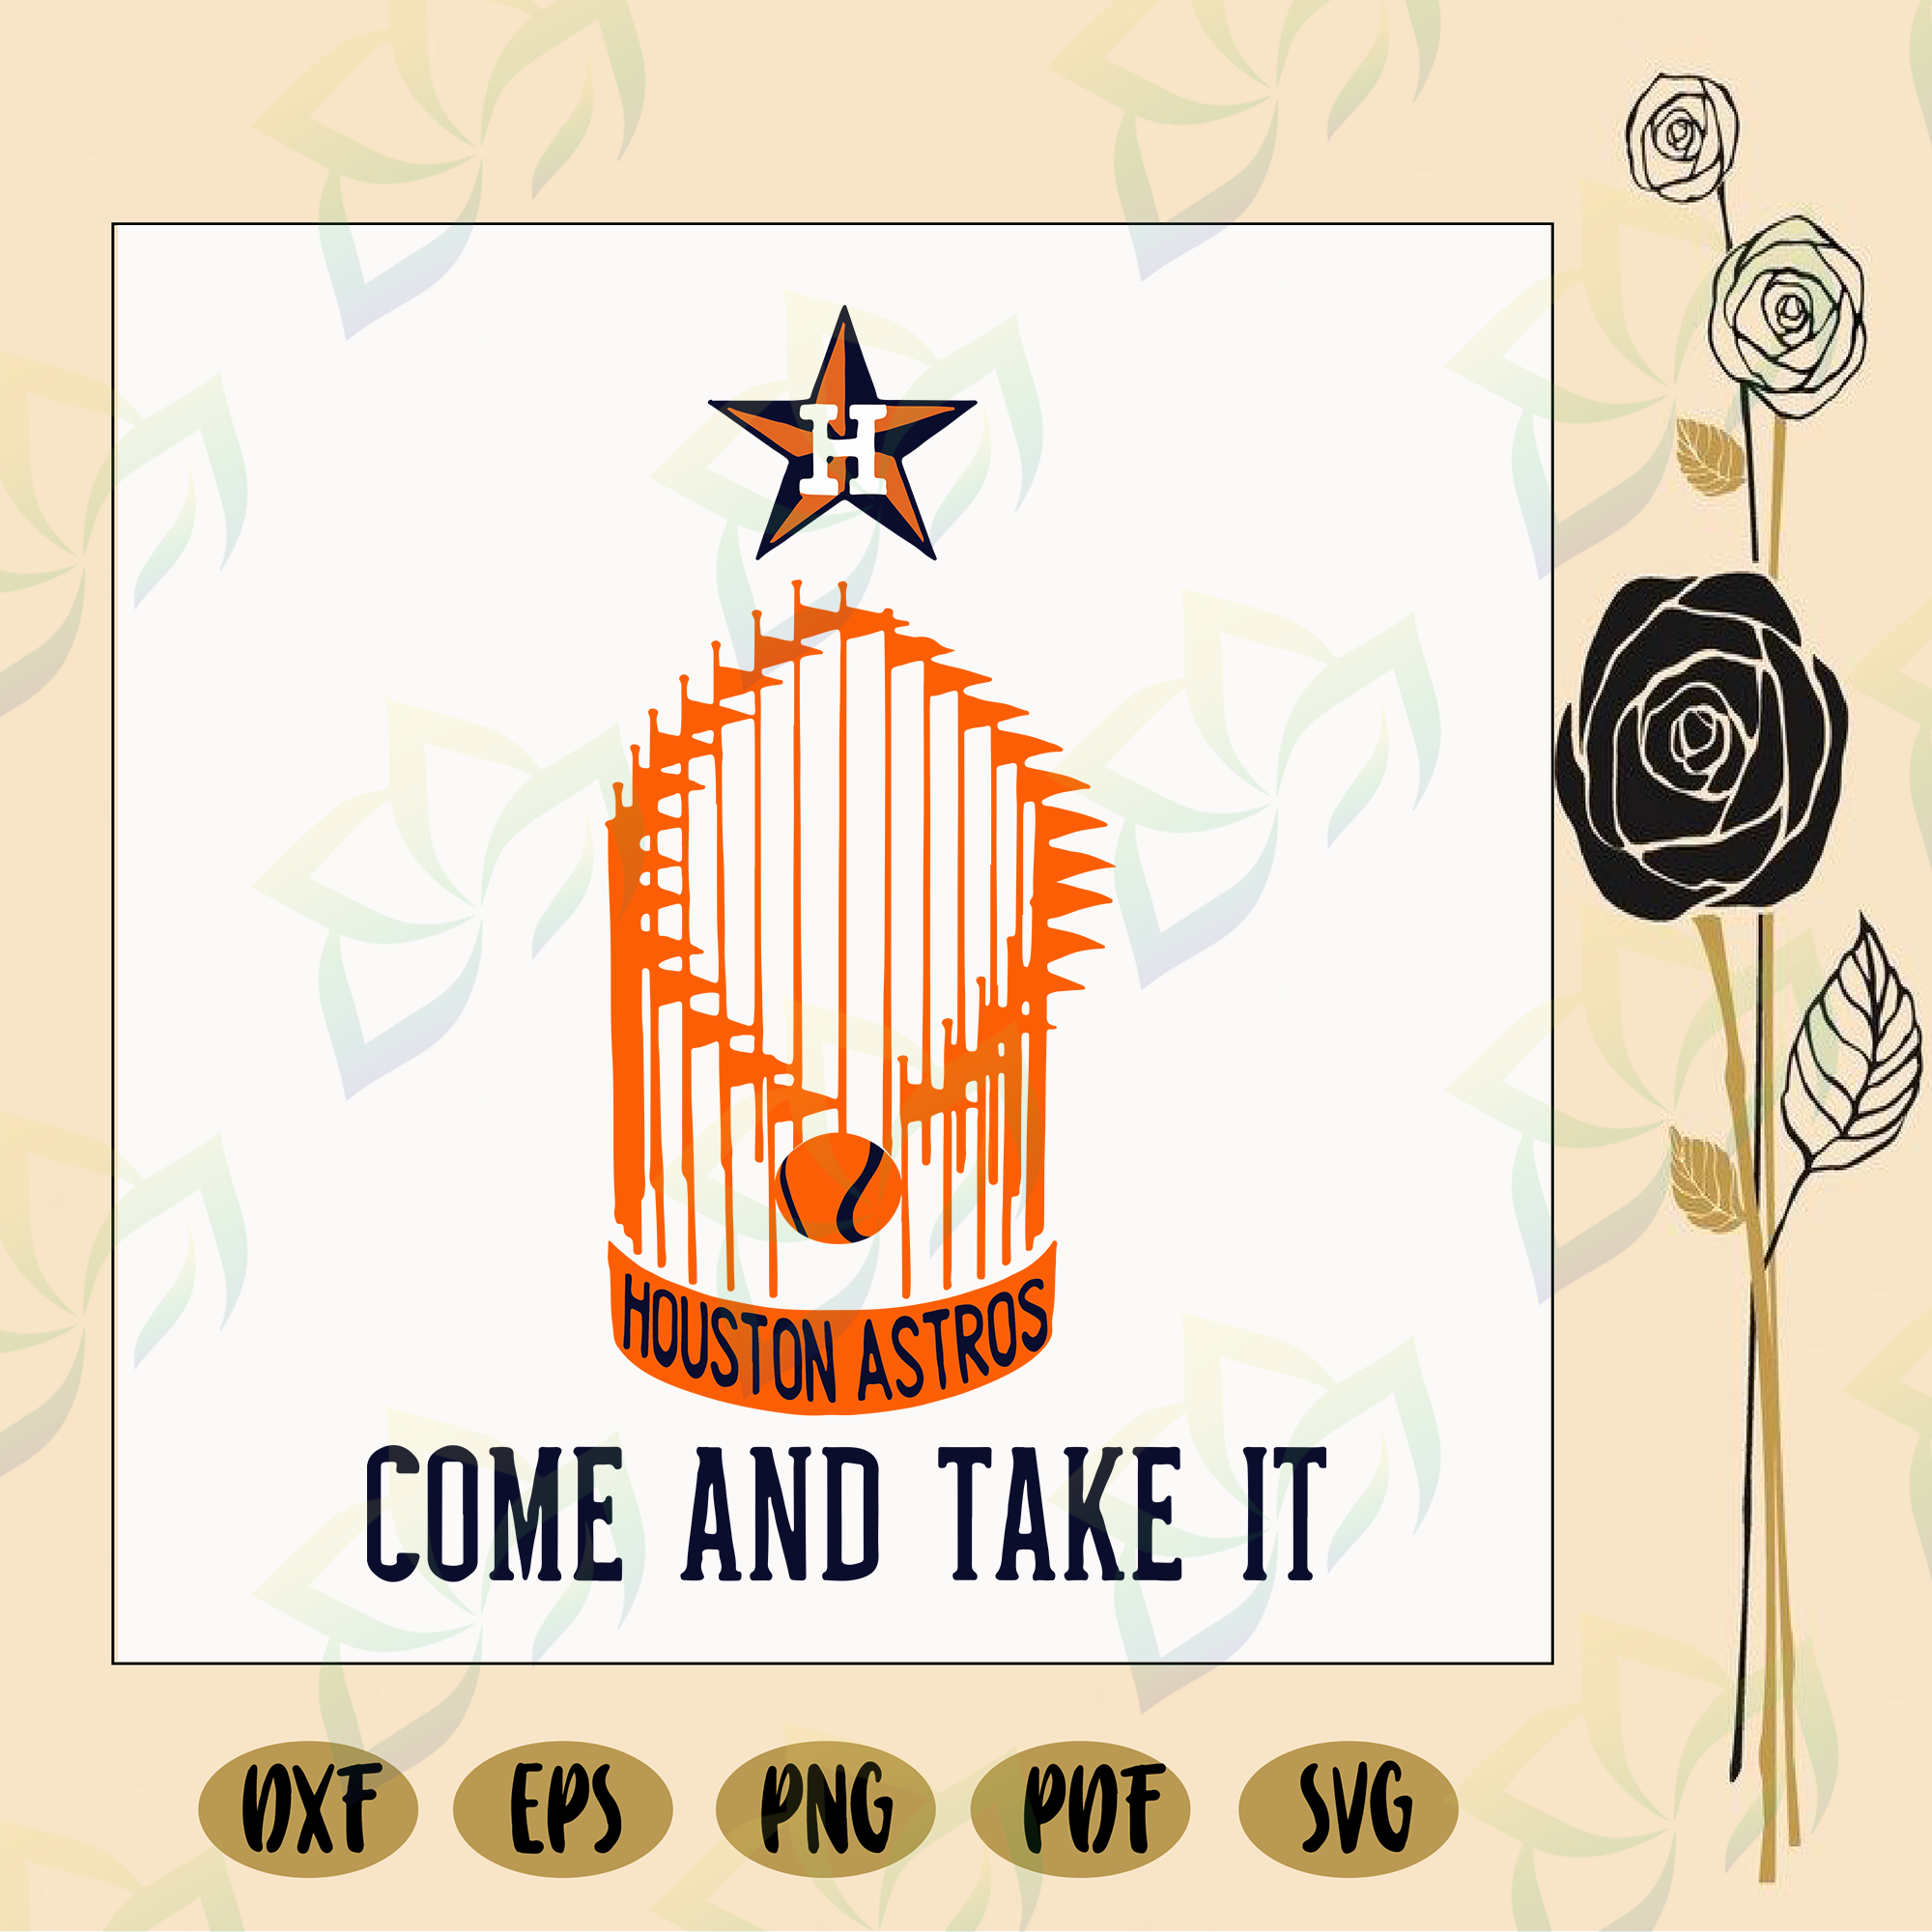 Download Houston Astros Come And Take It Houston Astros Svg Astros Astros Sv Blossomsvg